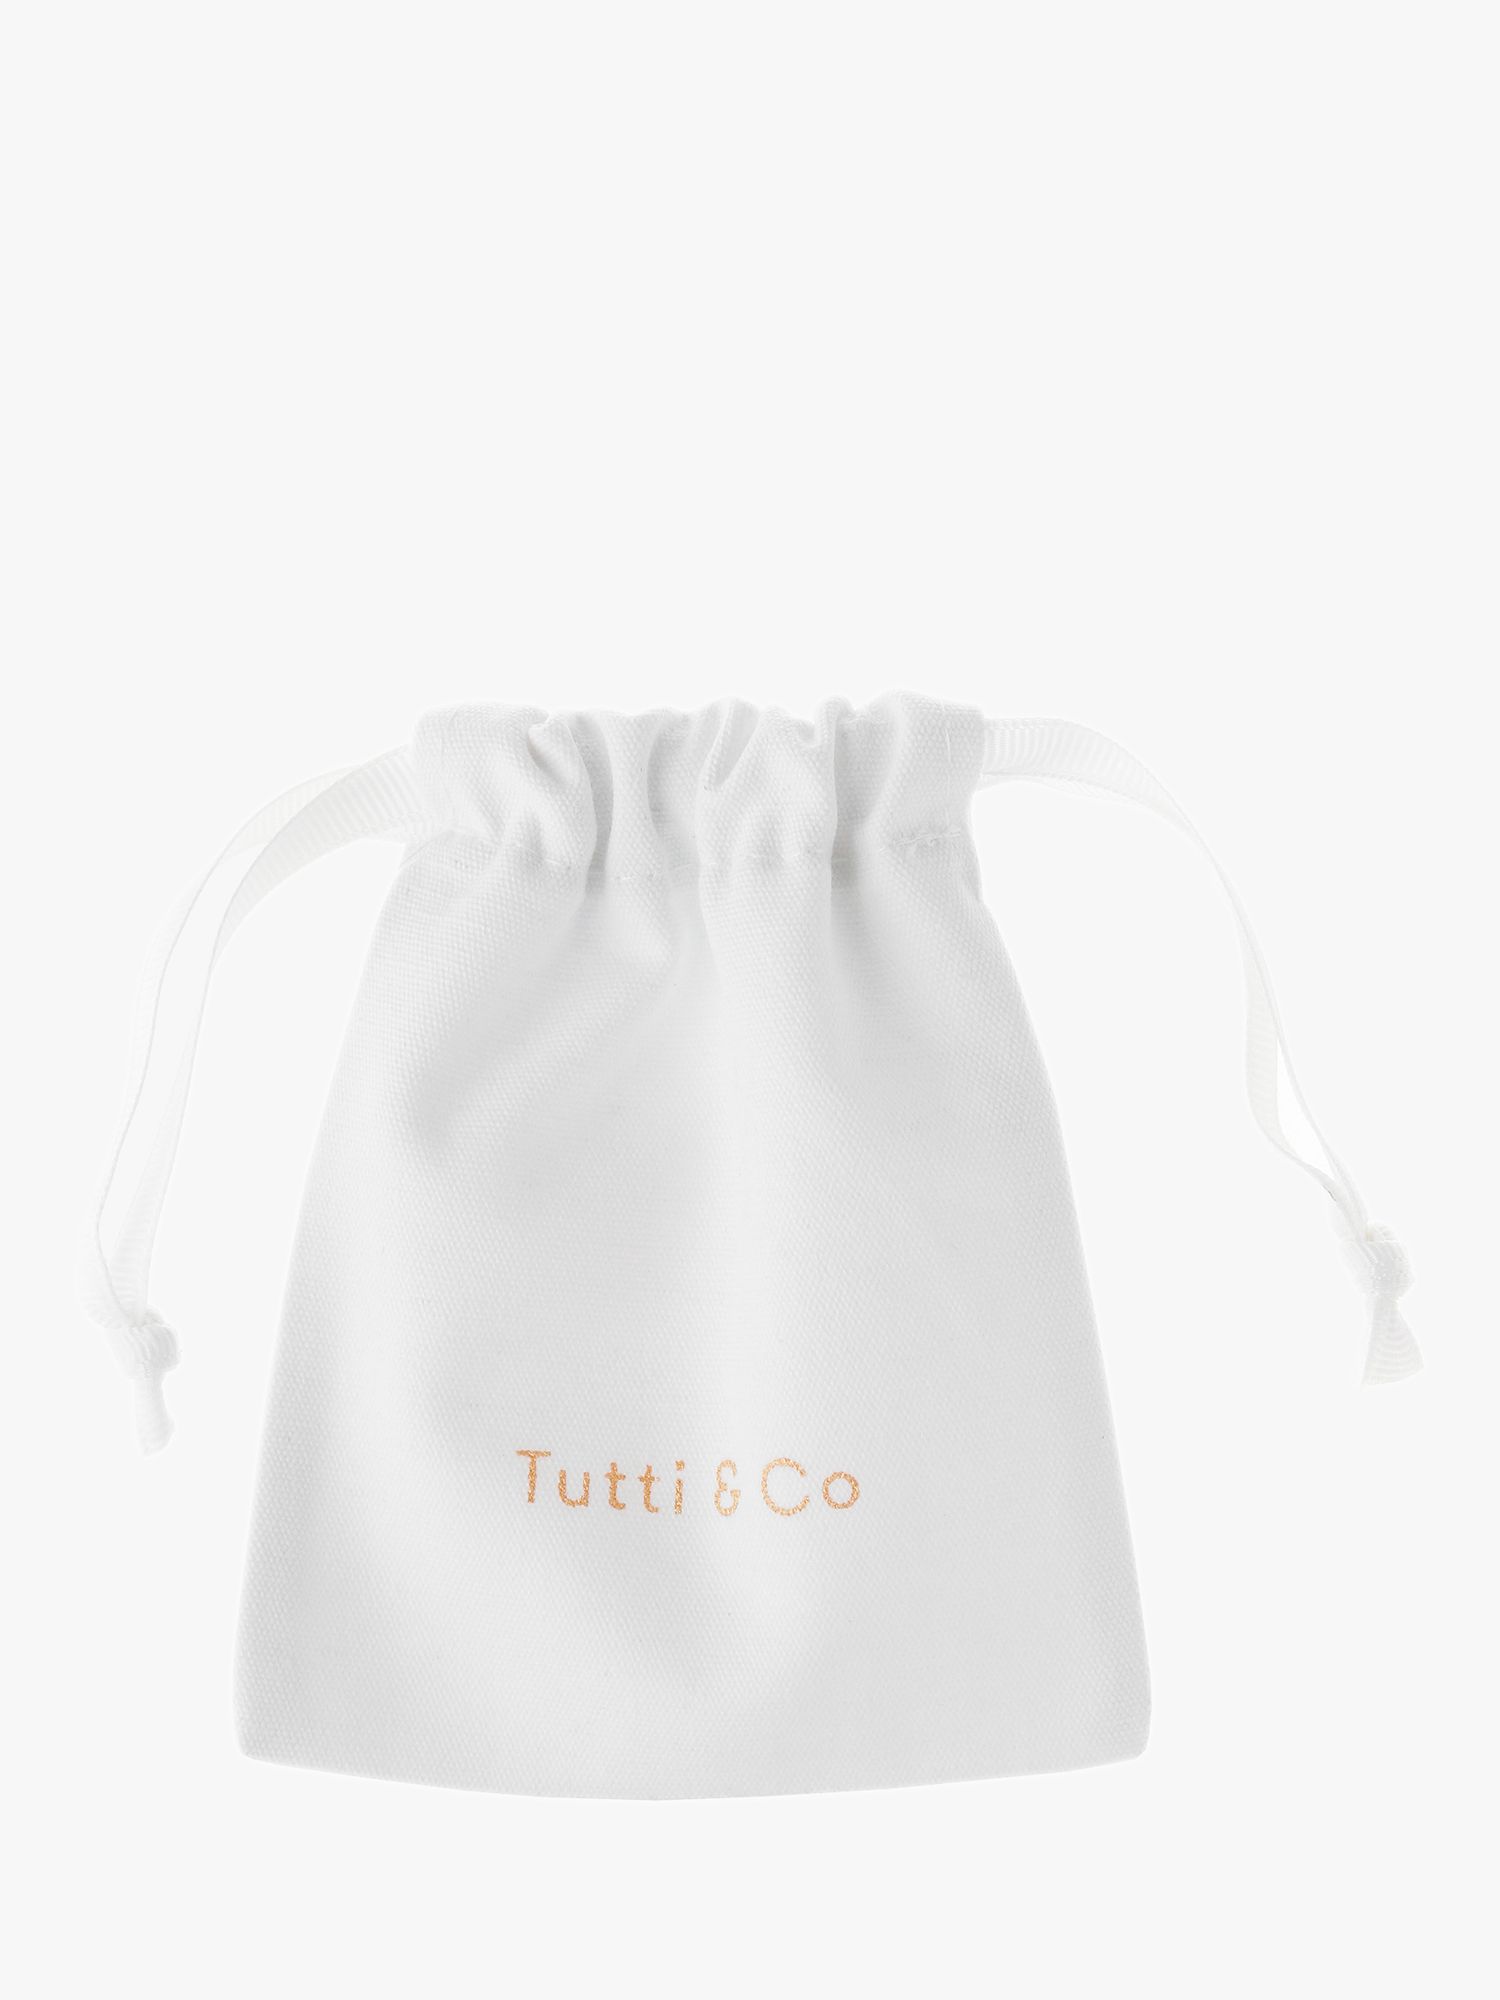 Buy Tutti & Co Cypress Double Layer Pendant Necklace Online at johnlewis.com